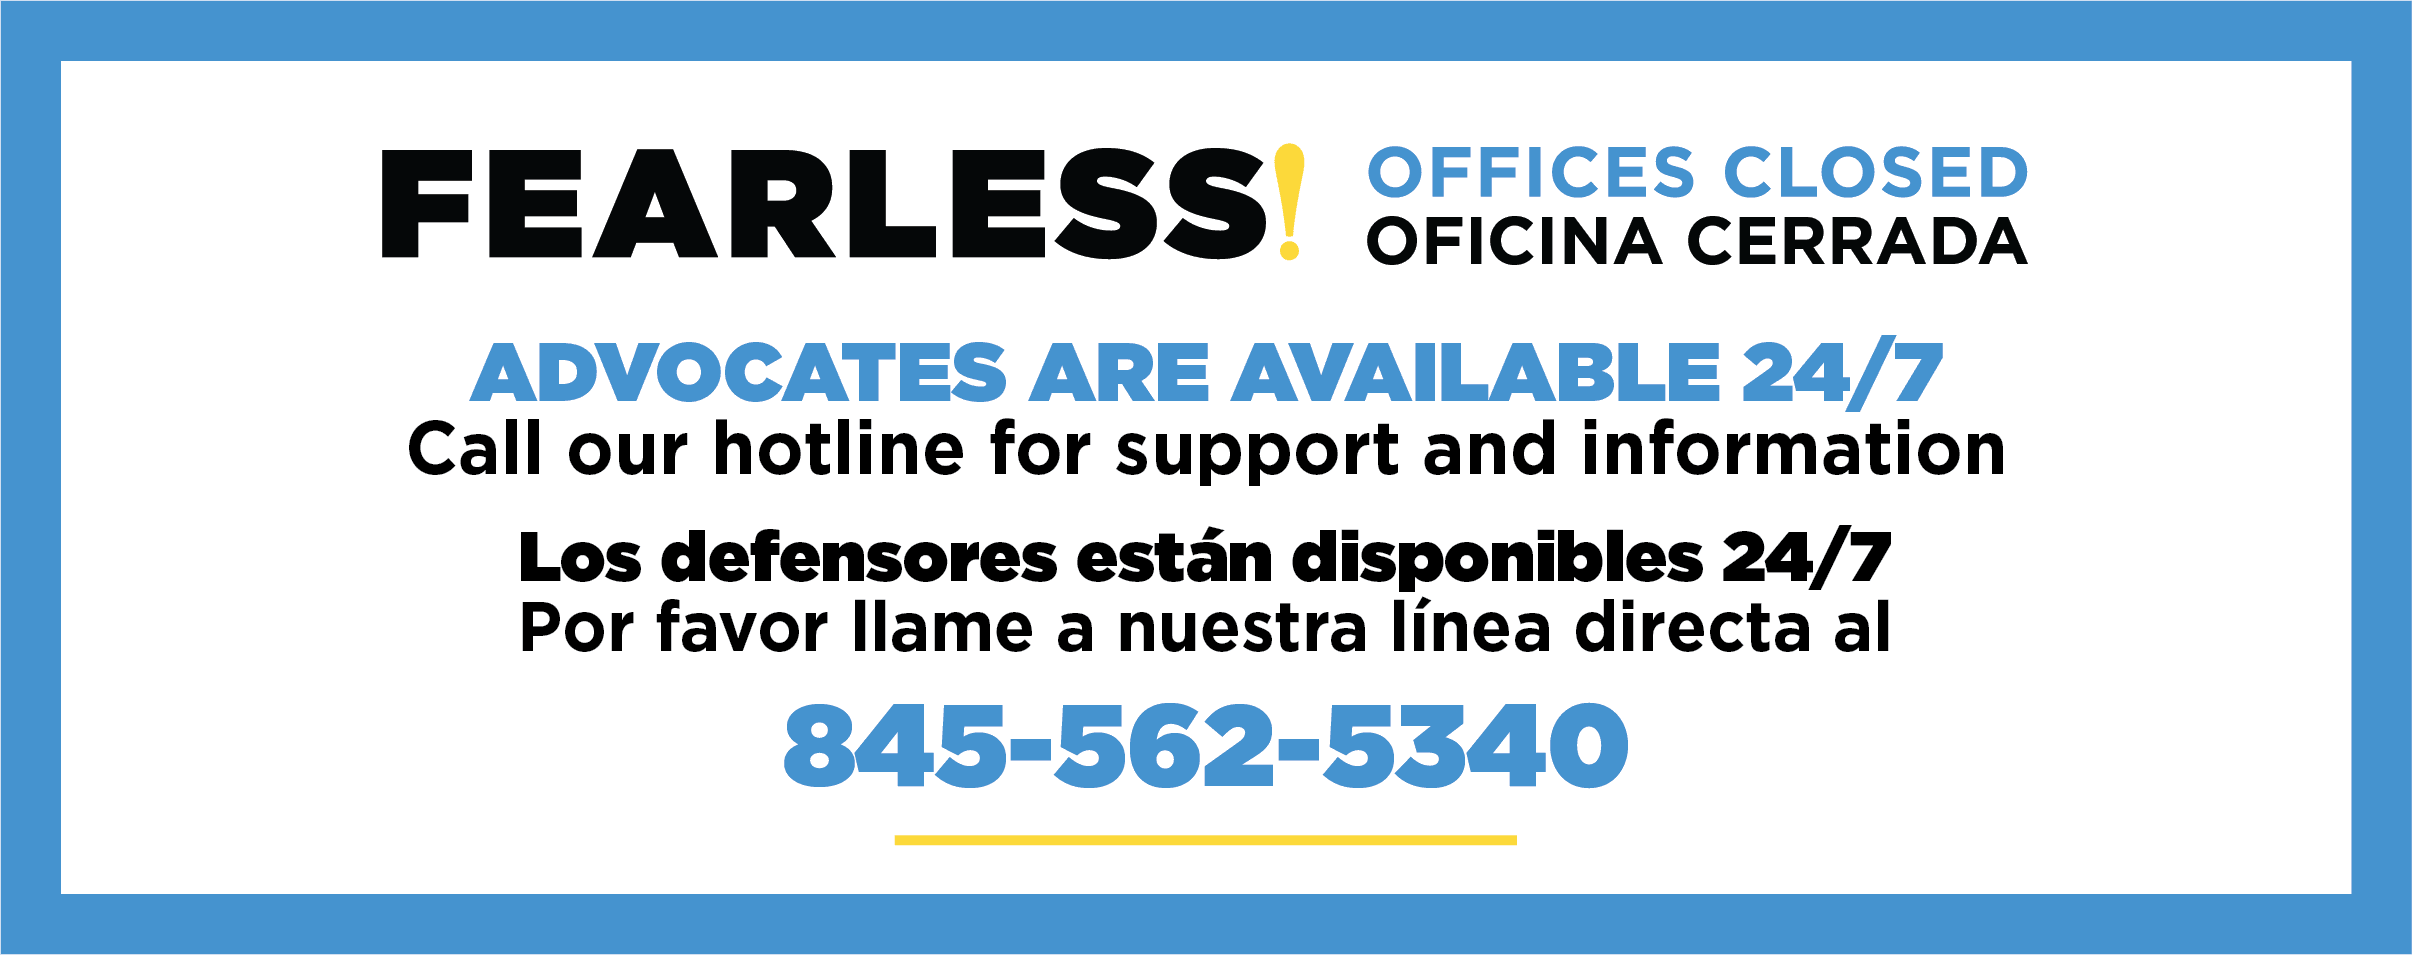 Office Closed - Advocates Available 24/7 through Hotline